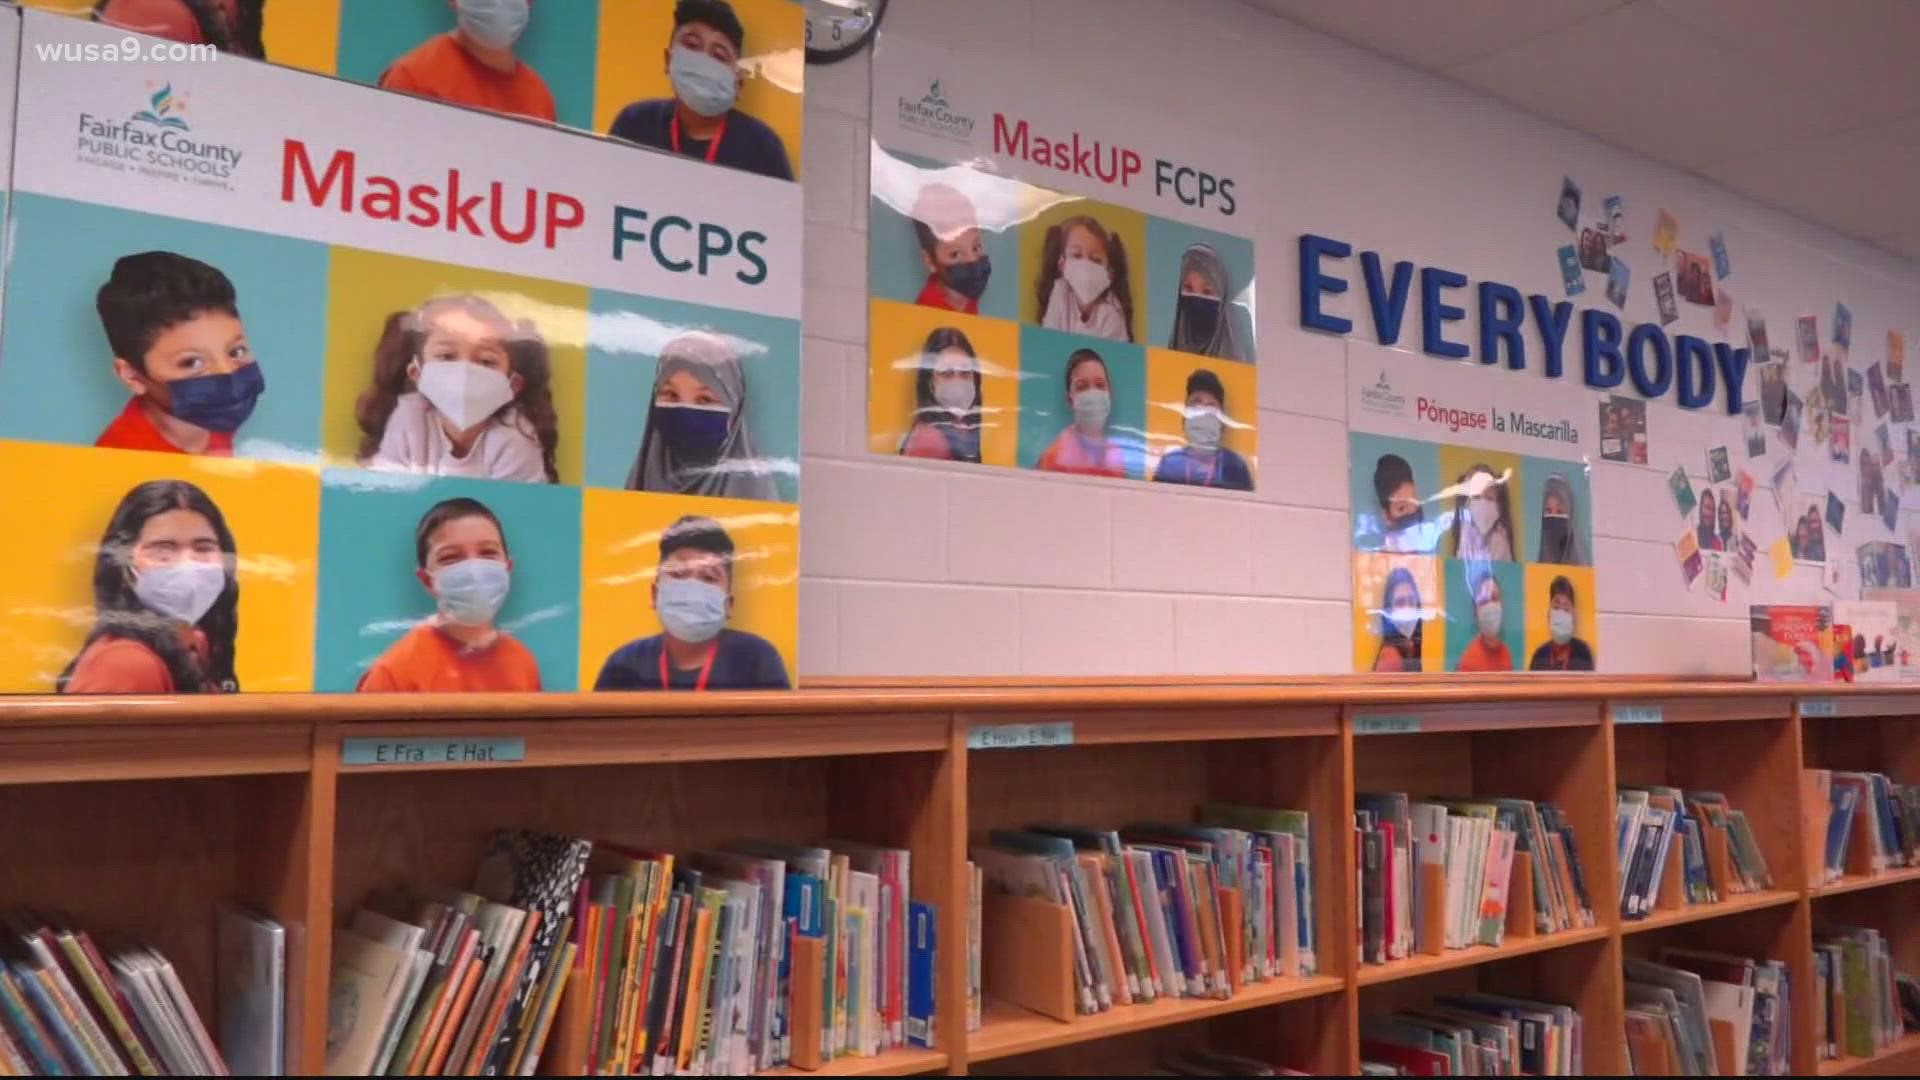 The seven school districts are challenging Gov. Youngkin's executive order on optional masks in schools. Some parents are protesting these schools.